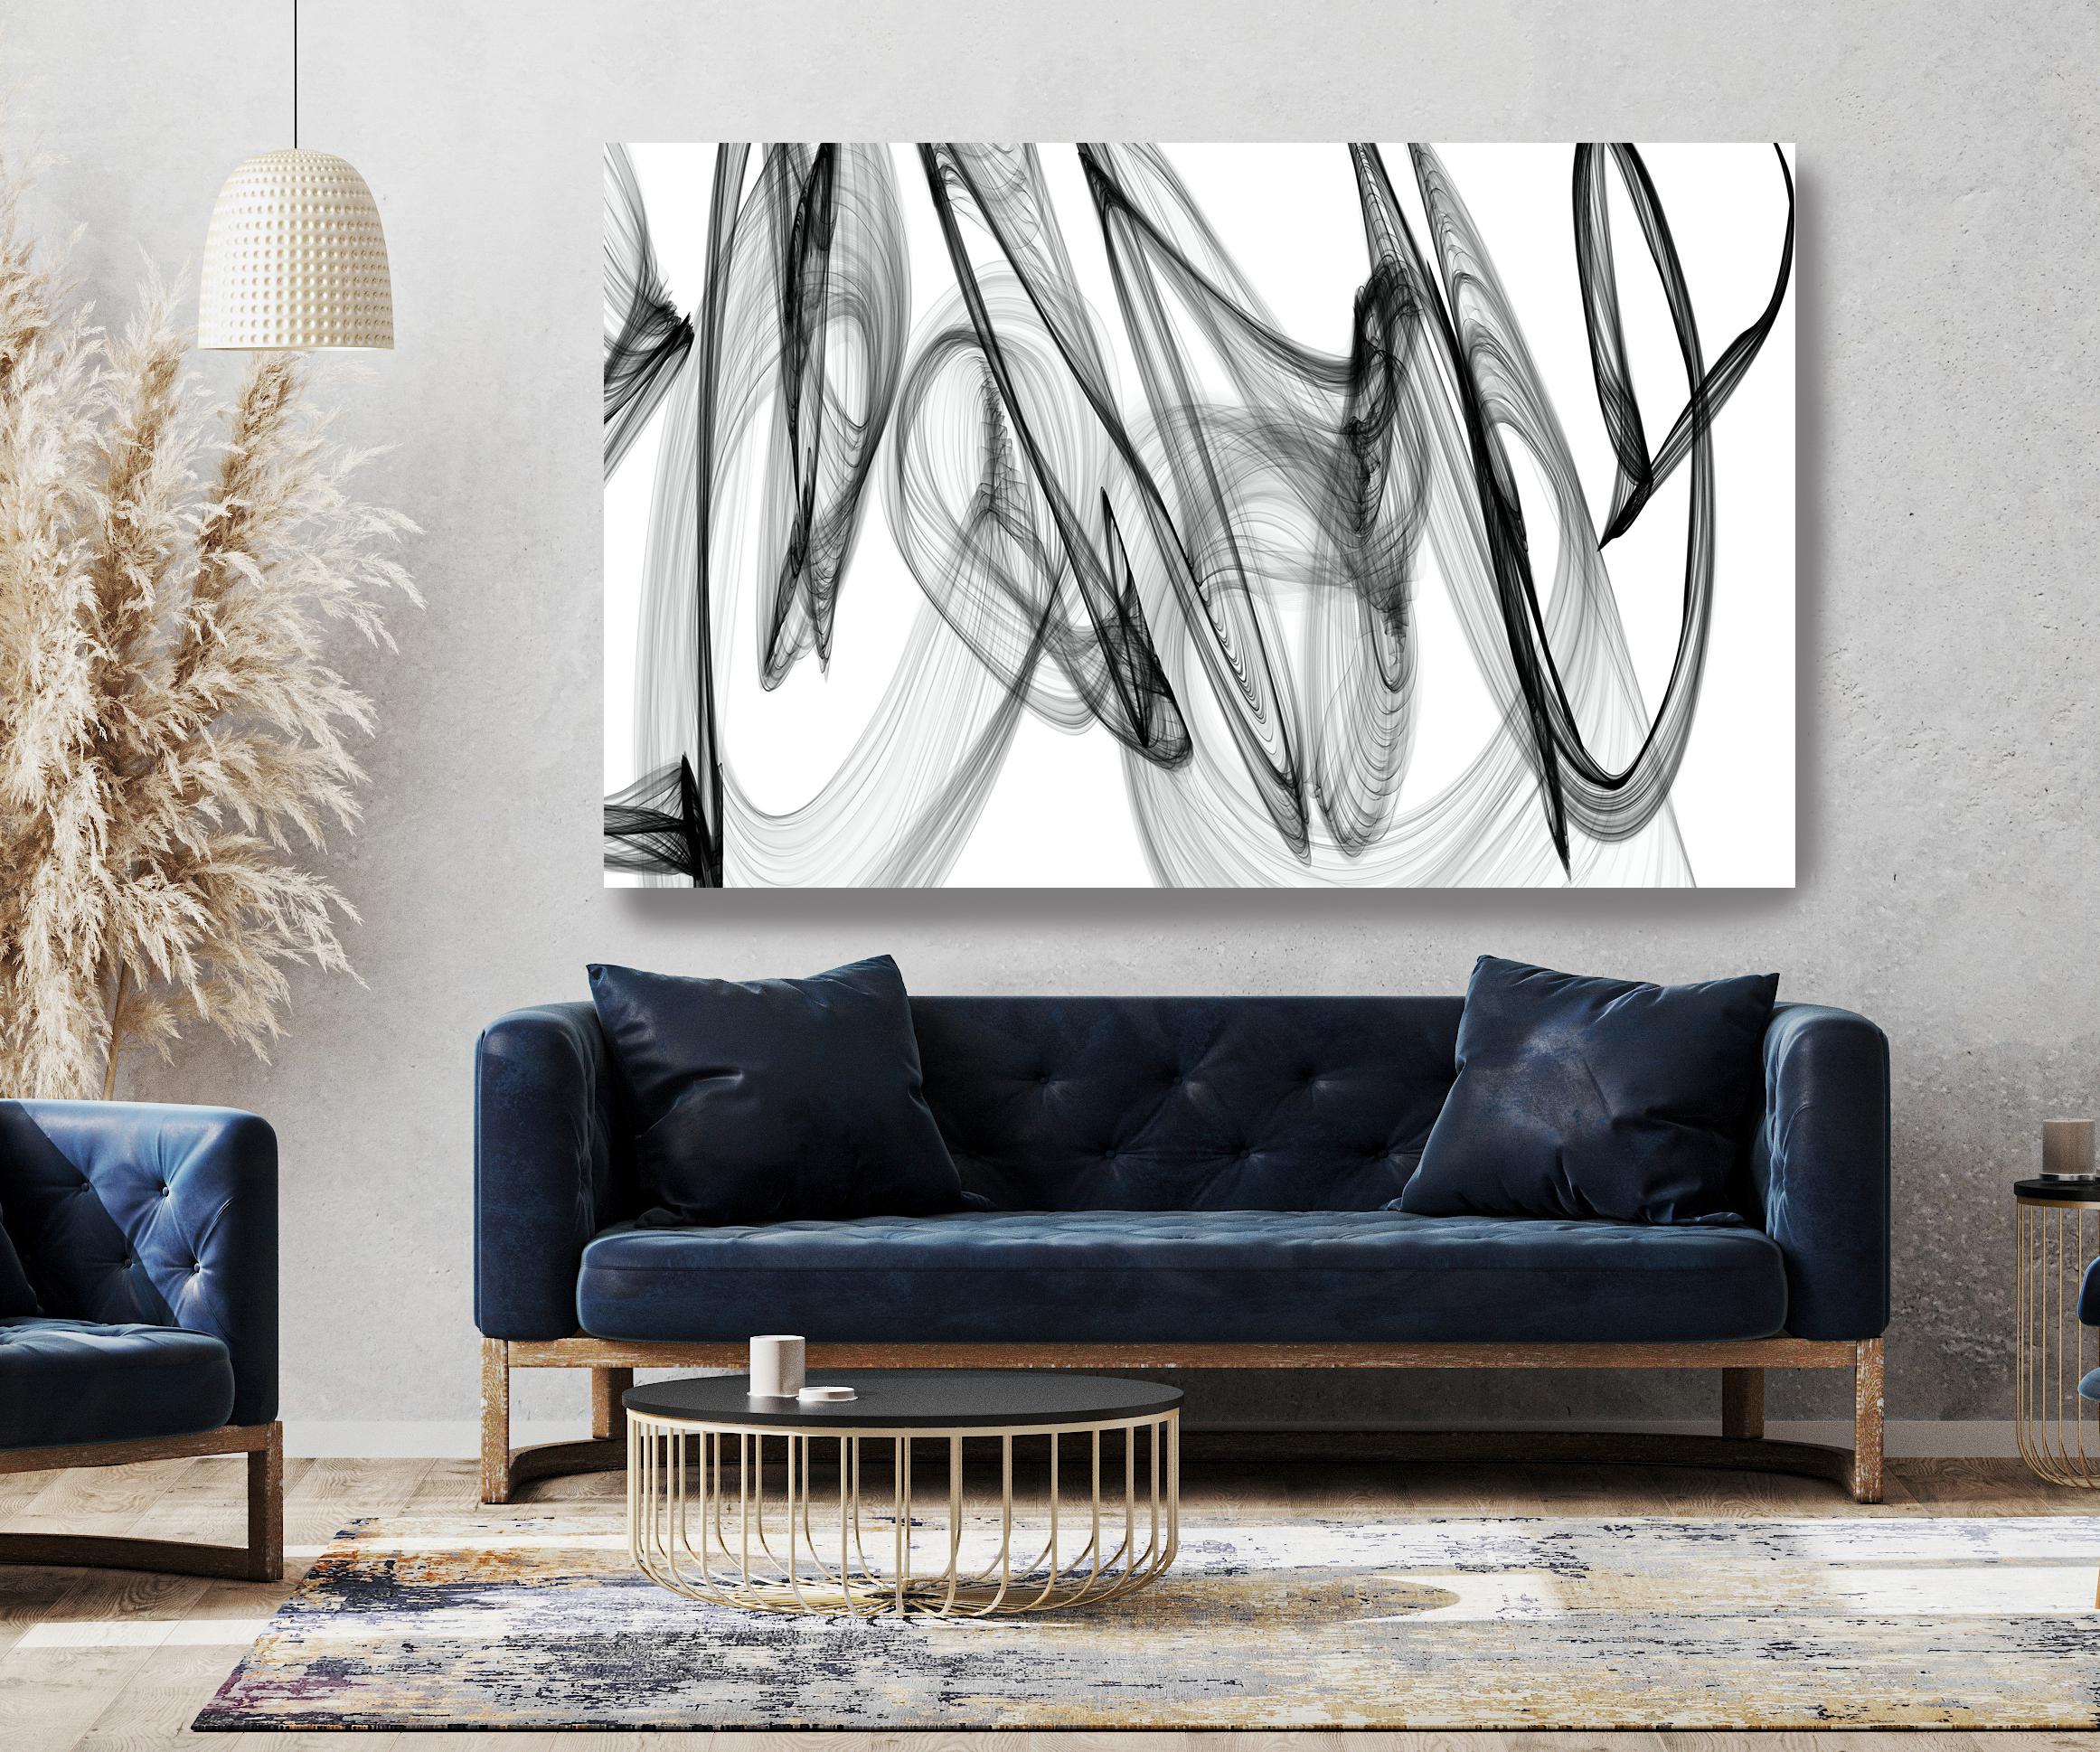 Black and White Minimalist New Media vs Painting 46"H X 80"W A Powerful Force